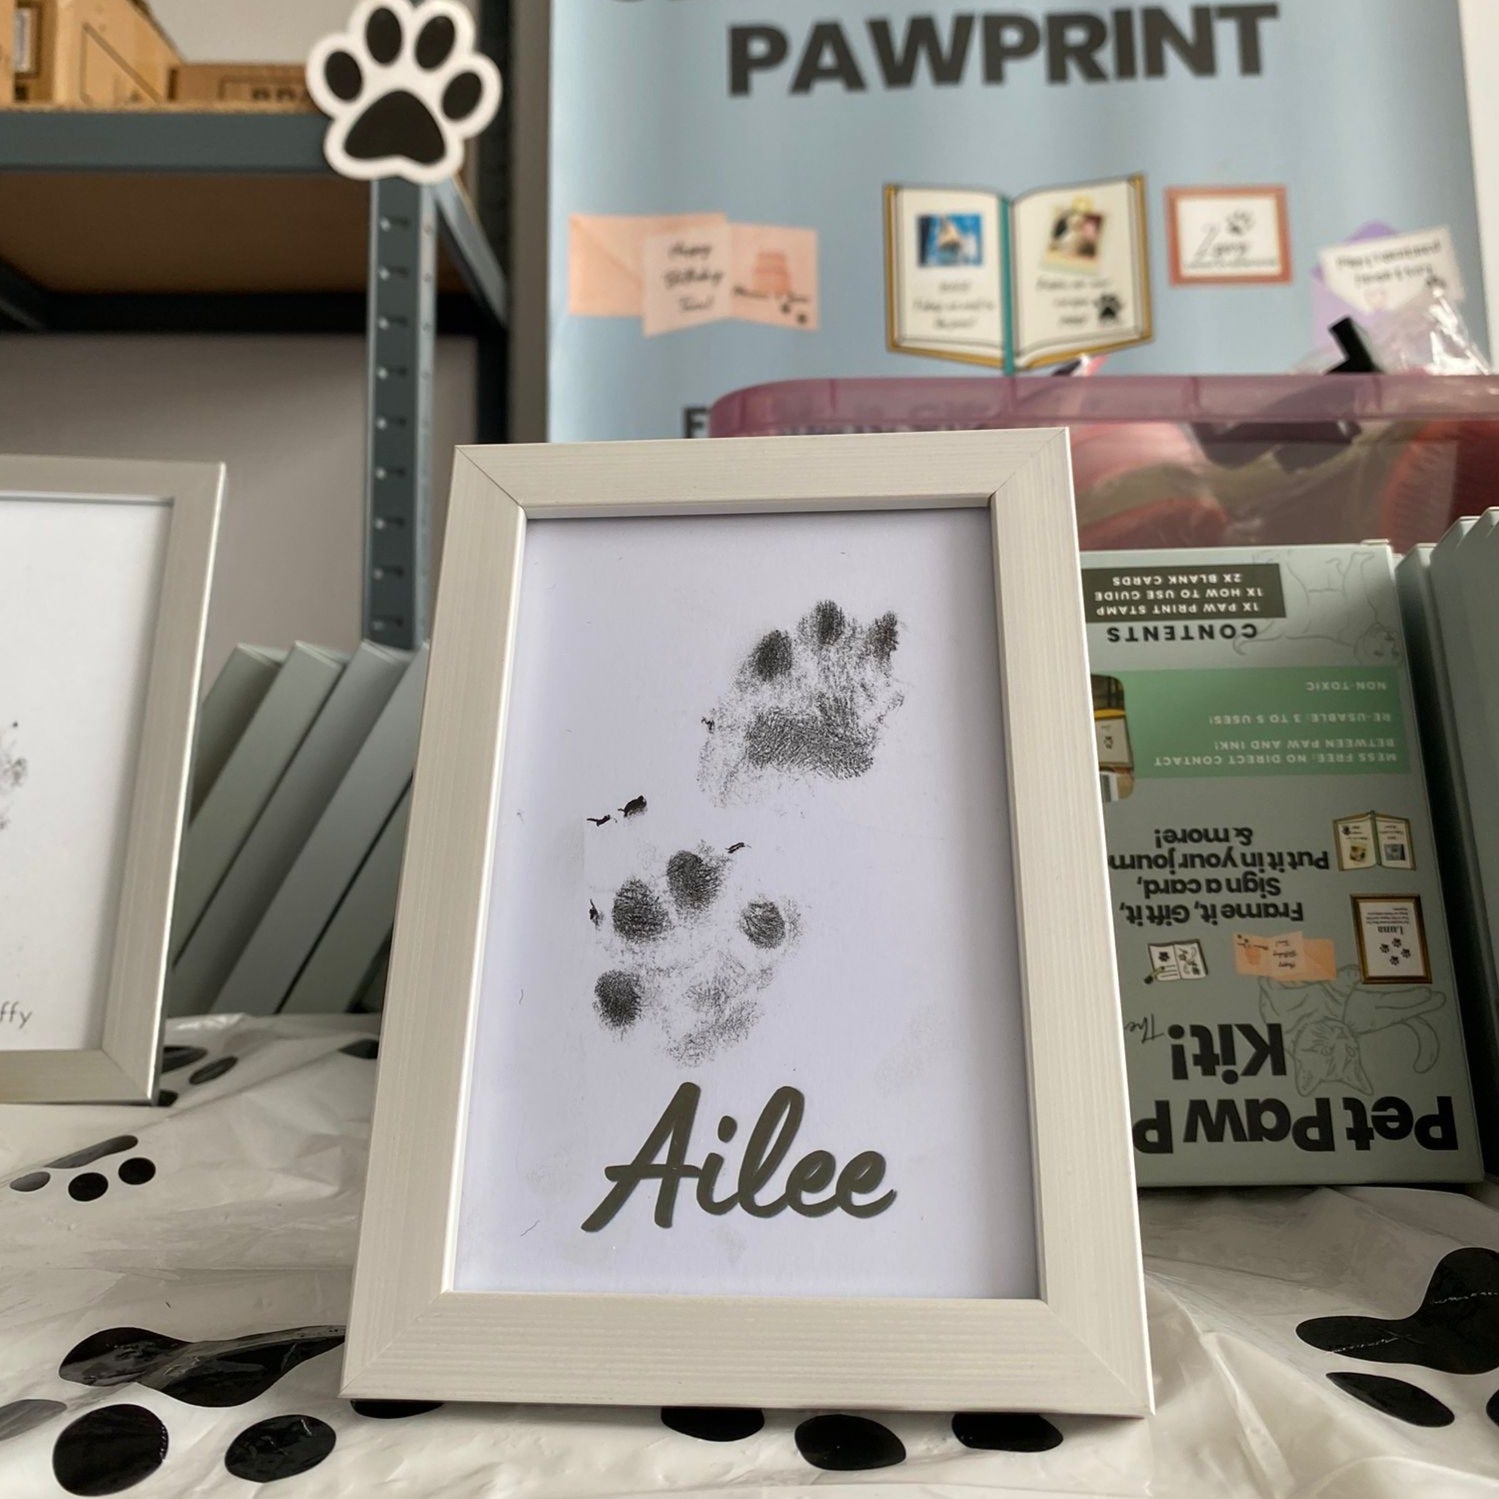 Forever Fun Times Easy-Clean Pet Paw Print Kit | Get Hundreds of Prints from One Low-Cost Paw Print Kit | 100% Safe and Pet-Friendly | No-Mess Paw PR